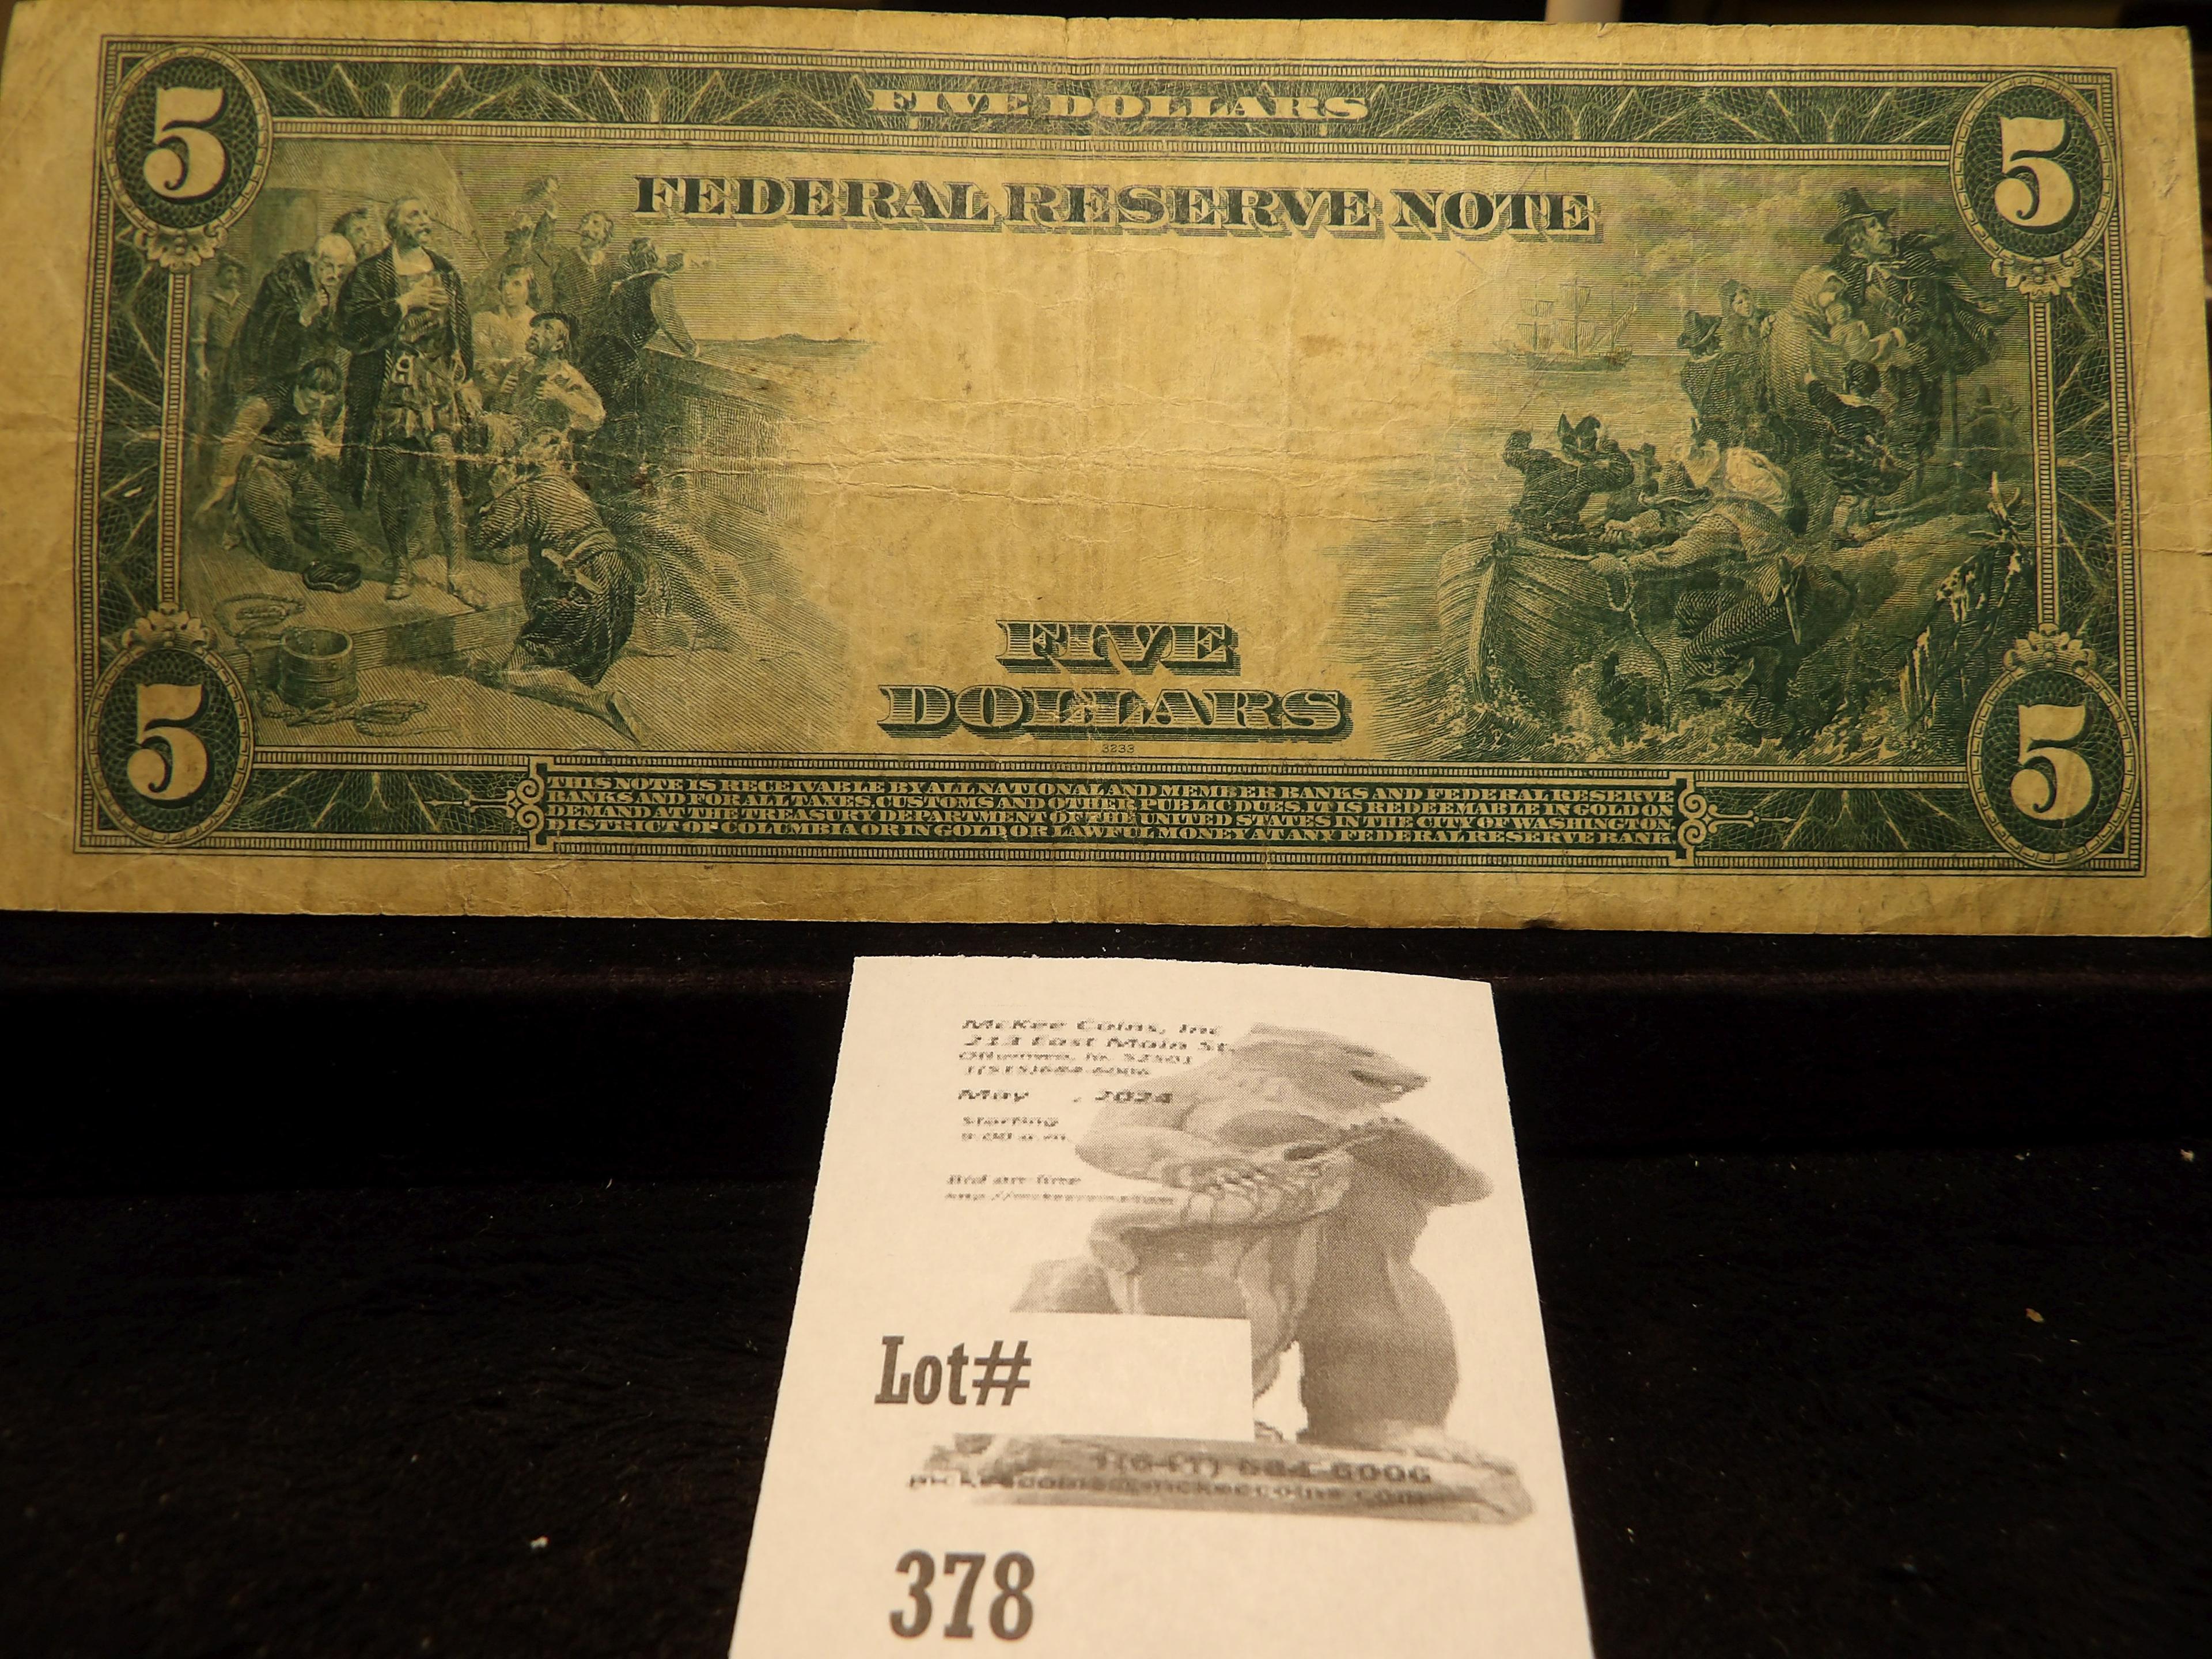 From our March, 2014 Coin Auction comes Series 1914 $5 Federal Reserve Note, 3-C Bank of Philadelphi